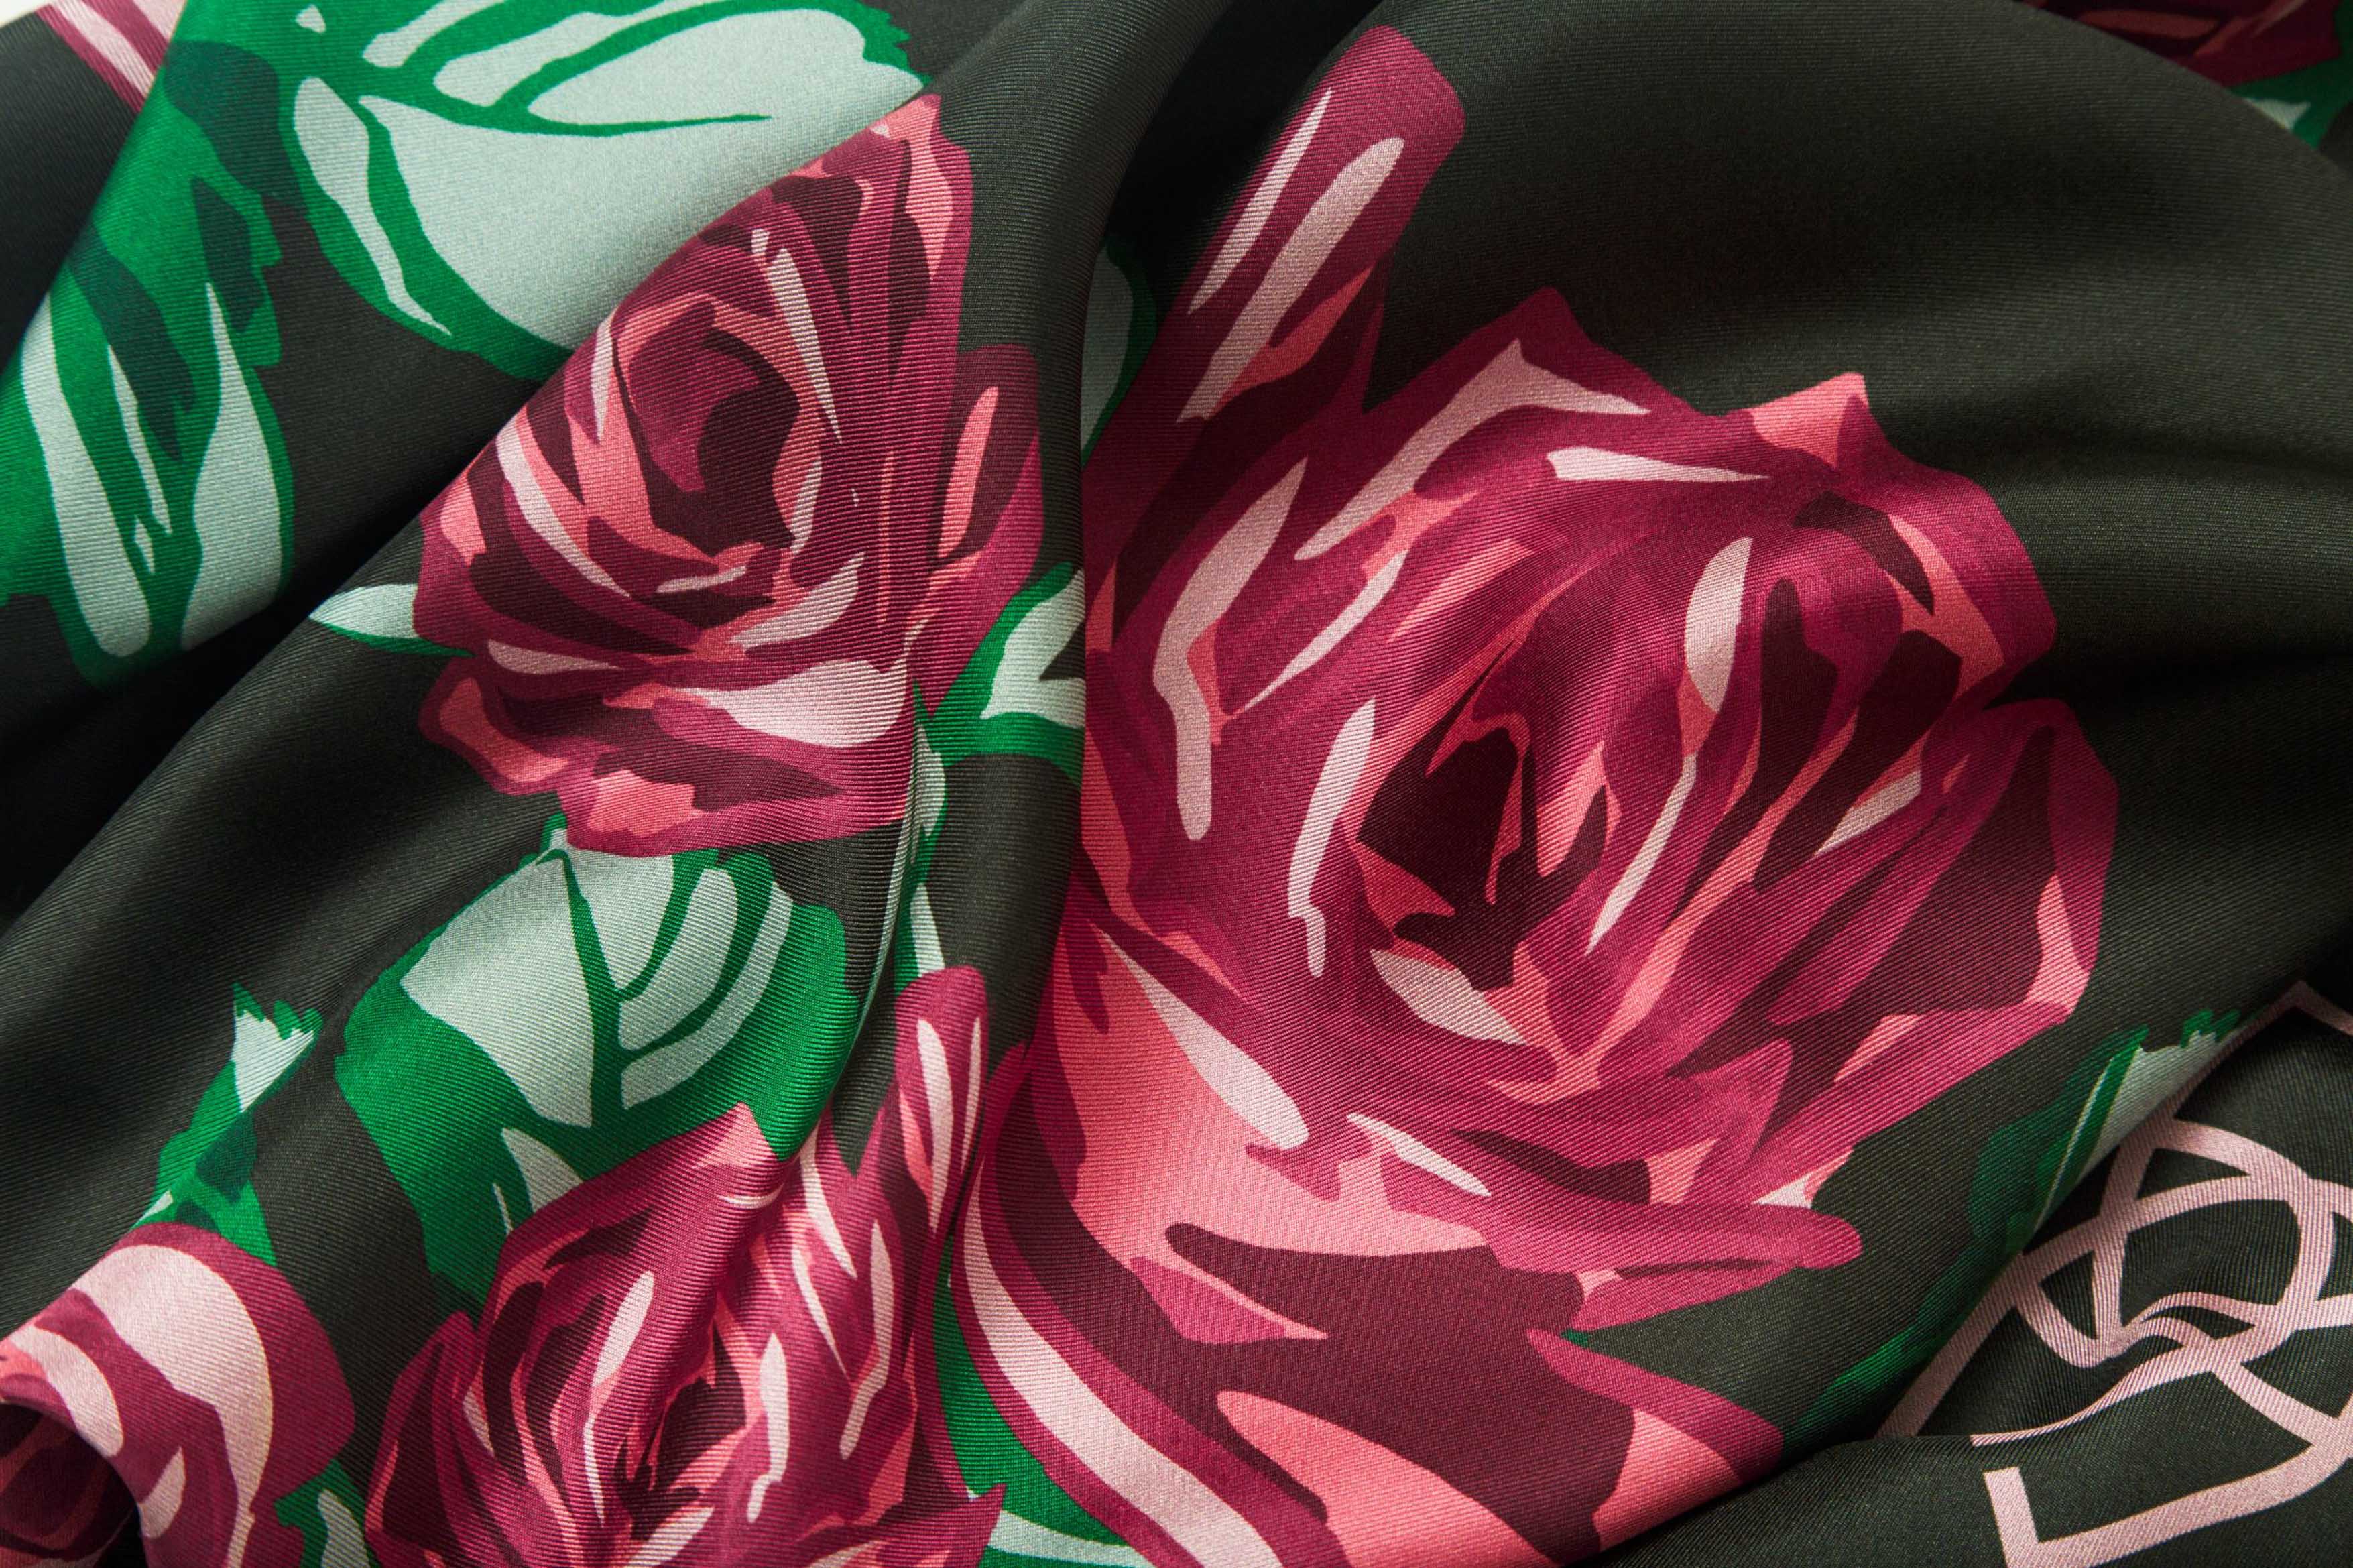 Close-up image of 100% silk square scarf featuring a motif of large-scale roses and leaves in shades of rich red and green on a background of deep forest green, with a dark burgundy border around the edges. Illustrates the lightly ridged texture of the silk twill along with the rich color tones and luminous nature of the silk scarf.